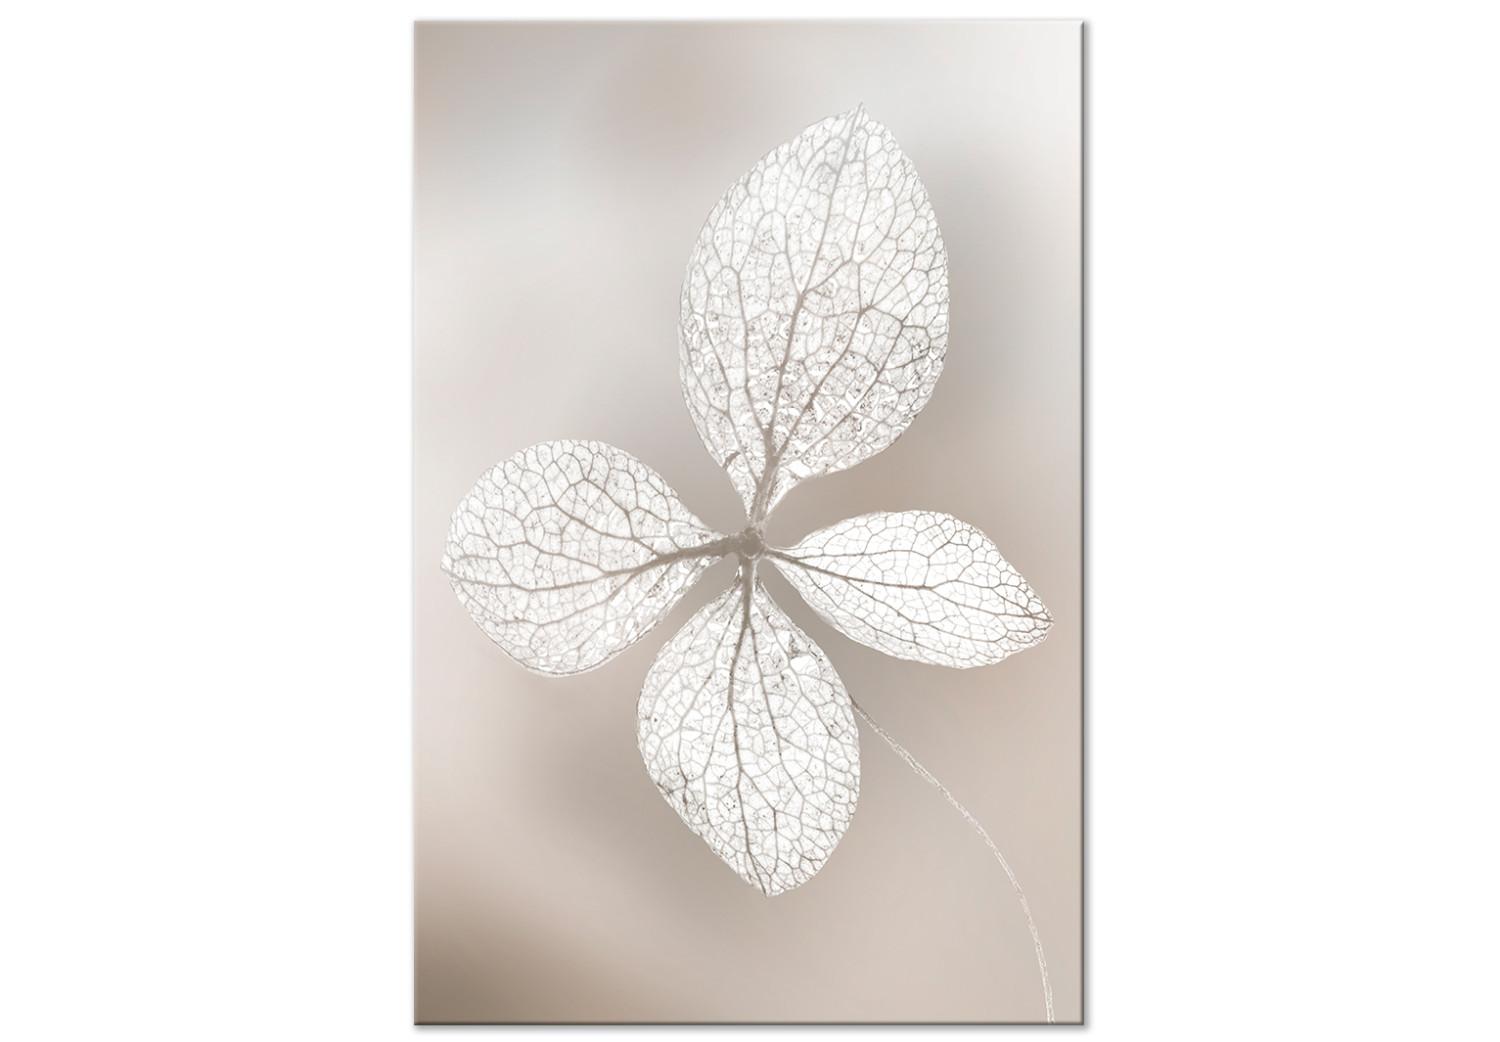 Canvas Lacy Beauty (1-piece) Vertical - white leaves in boho motif